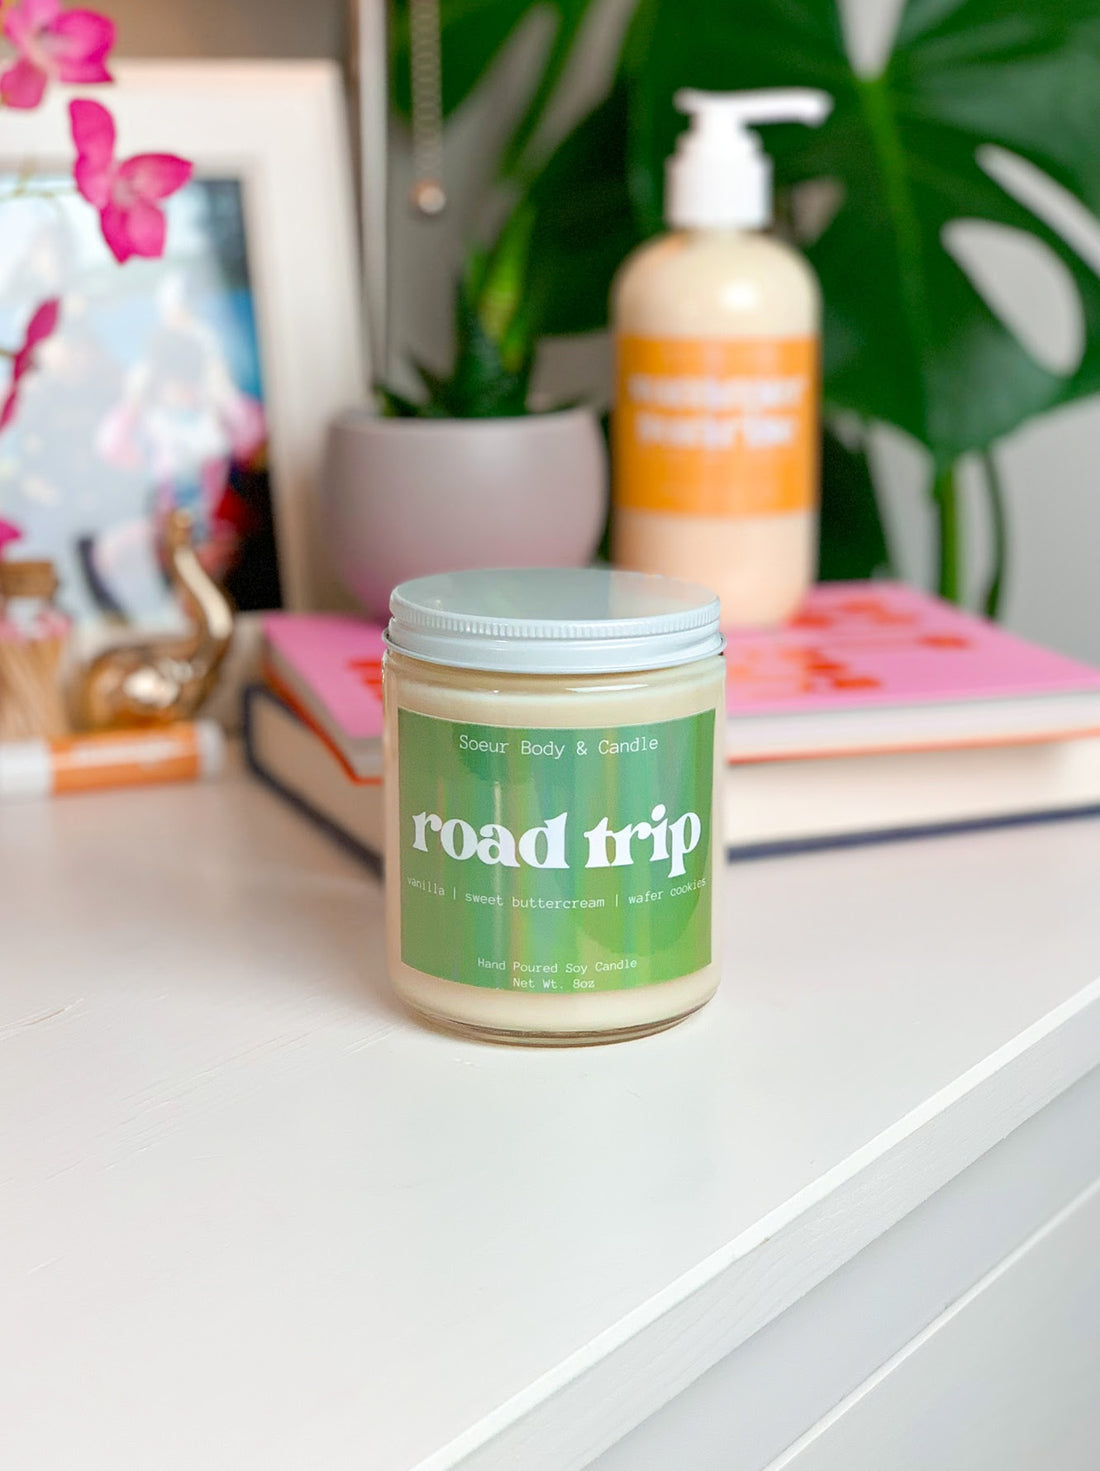 Road Trip Soy Candle (vanilla, sweet buttercream, wafer cookies)